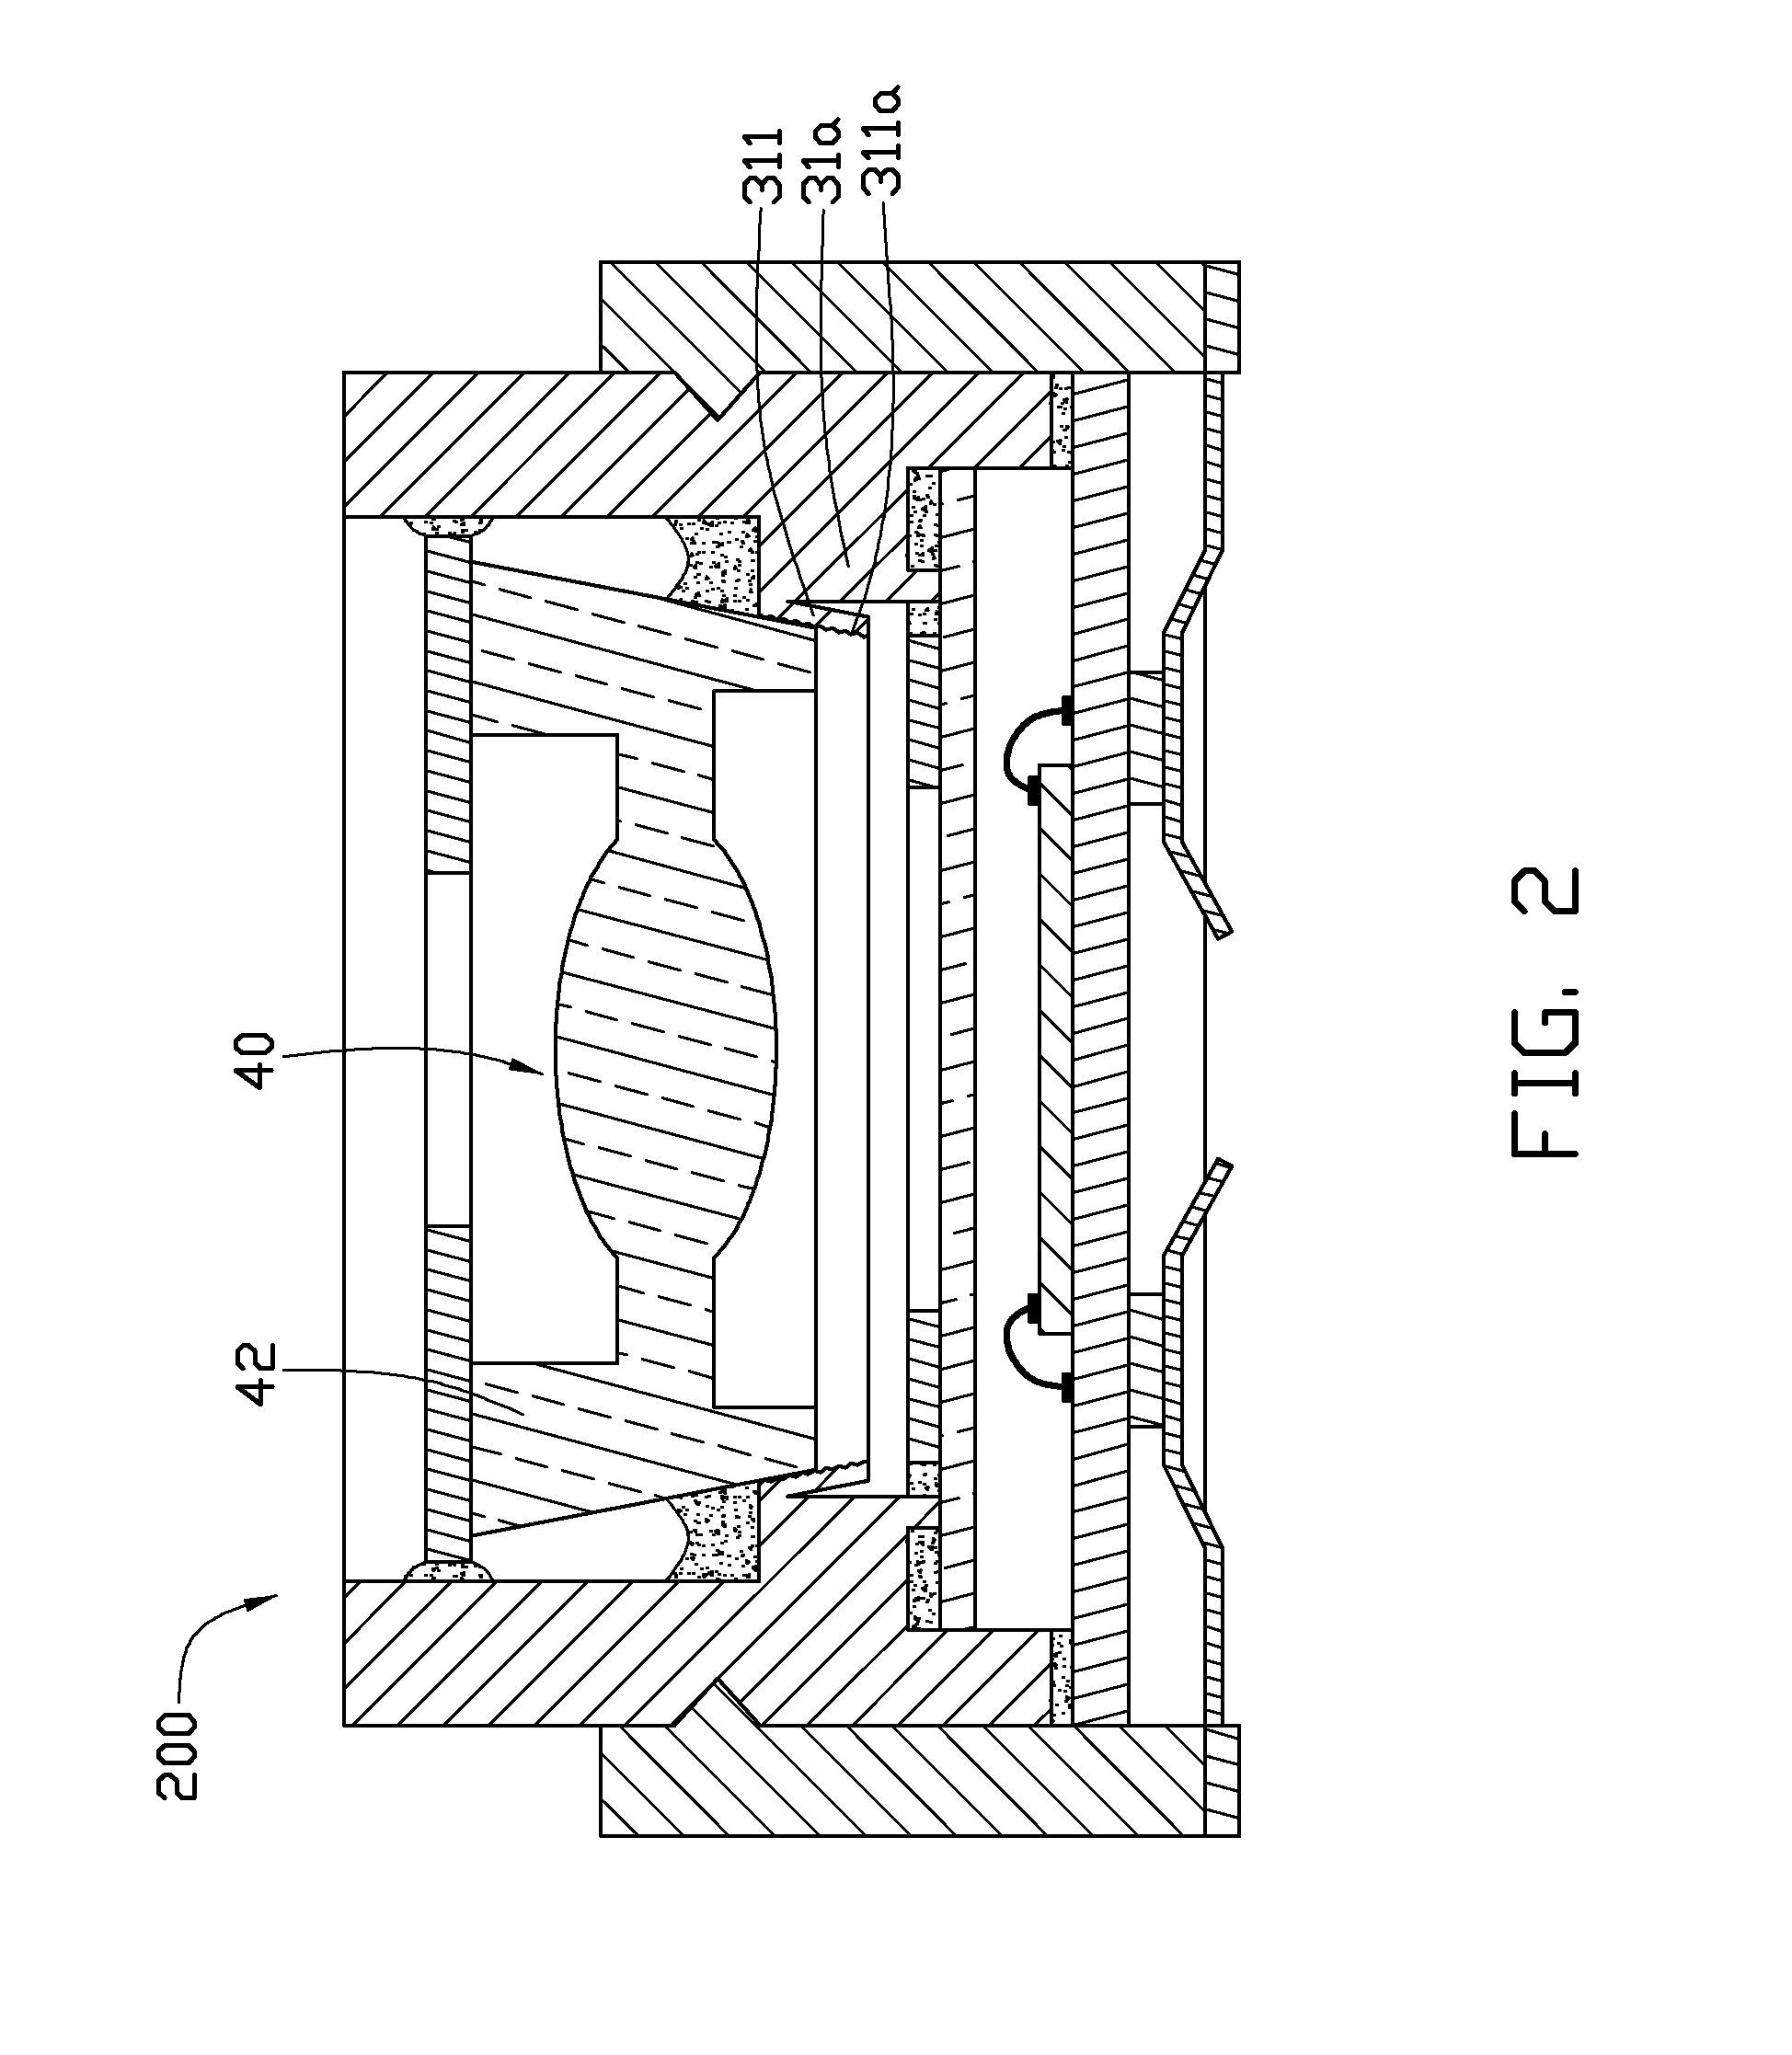 Imaging module with fixed-focus lens